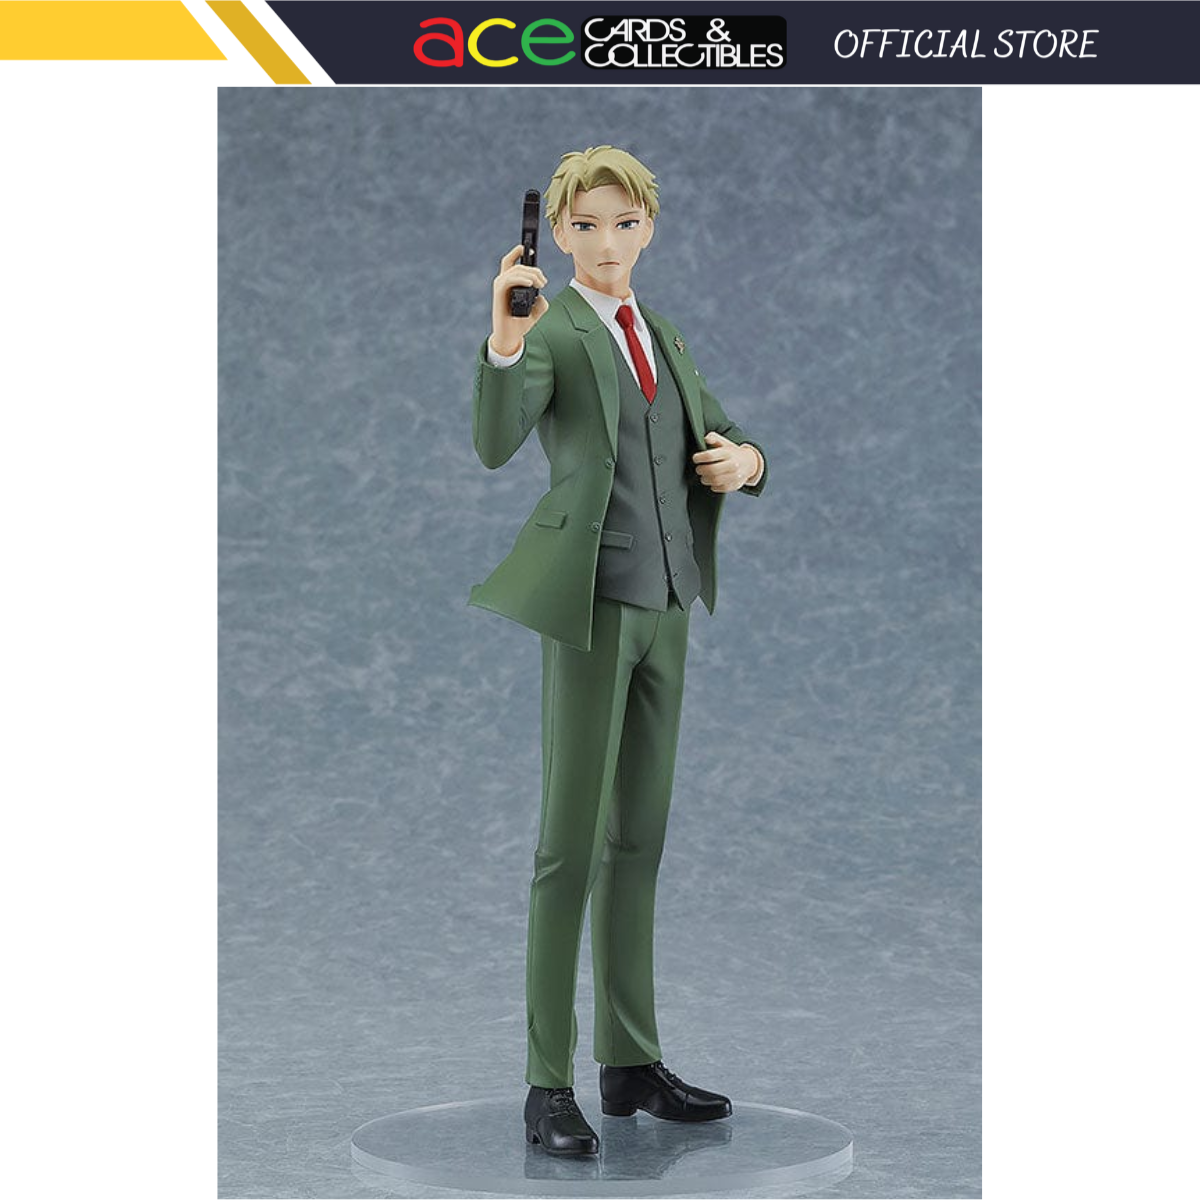 Spy x Family Pop Up Parade "Loid Forger"-Good Smile Company-Ace Cards & Collectibles